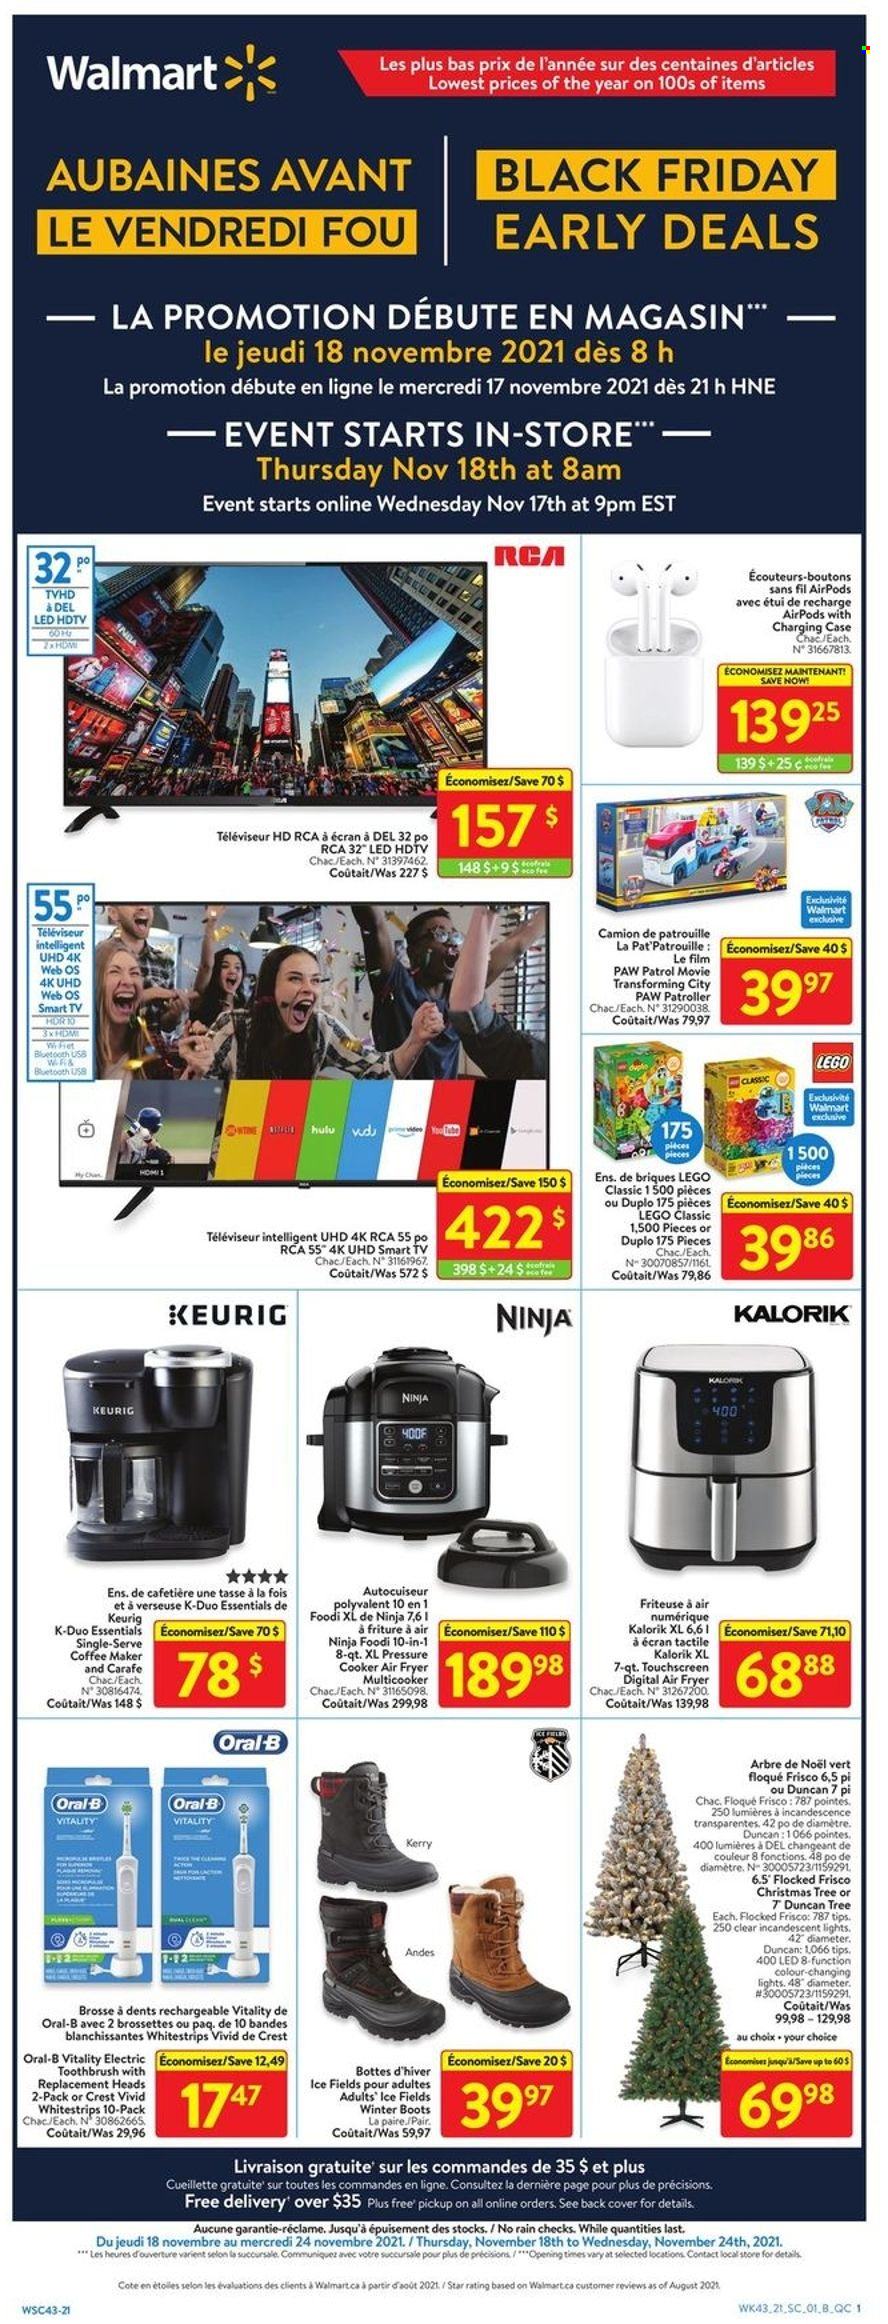 thumbnail - Walmart Flyer - November 17, 2021 - November 24, 2021 - Sales products - webos, Paw Patrol, Frisco, Keurig, toothbrush, Crest, bijzettafel, pressure cooker, RCA, UHD TV, HDTV, TV, Airpods, coffee machine, air fryer, christmas tree, boots, winter boots, LEGO Duplo, LEGO Classic, LEGO, smart tv, Oral-B. Page 1.